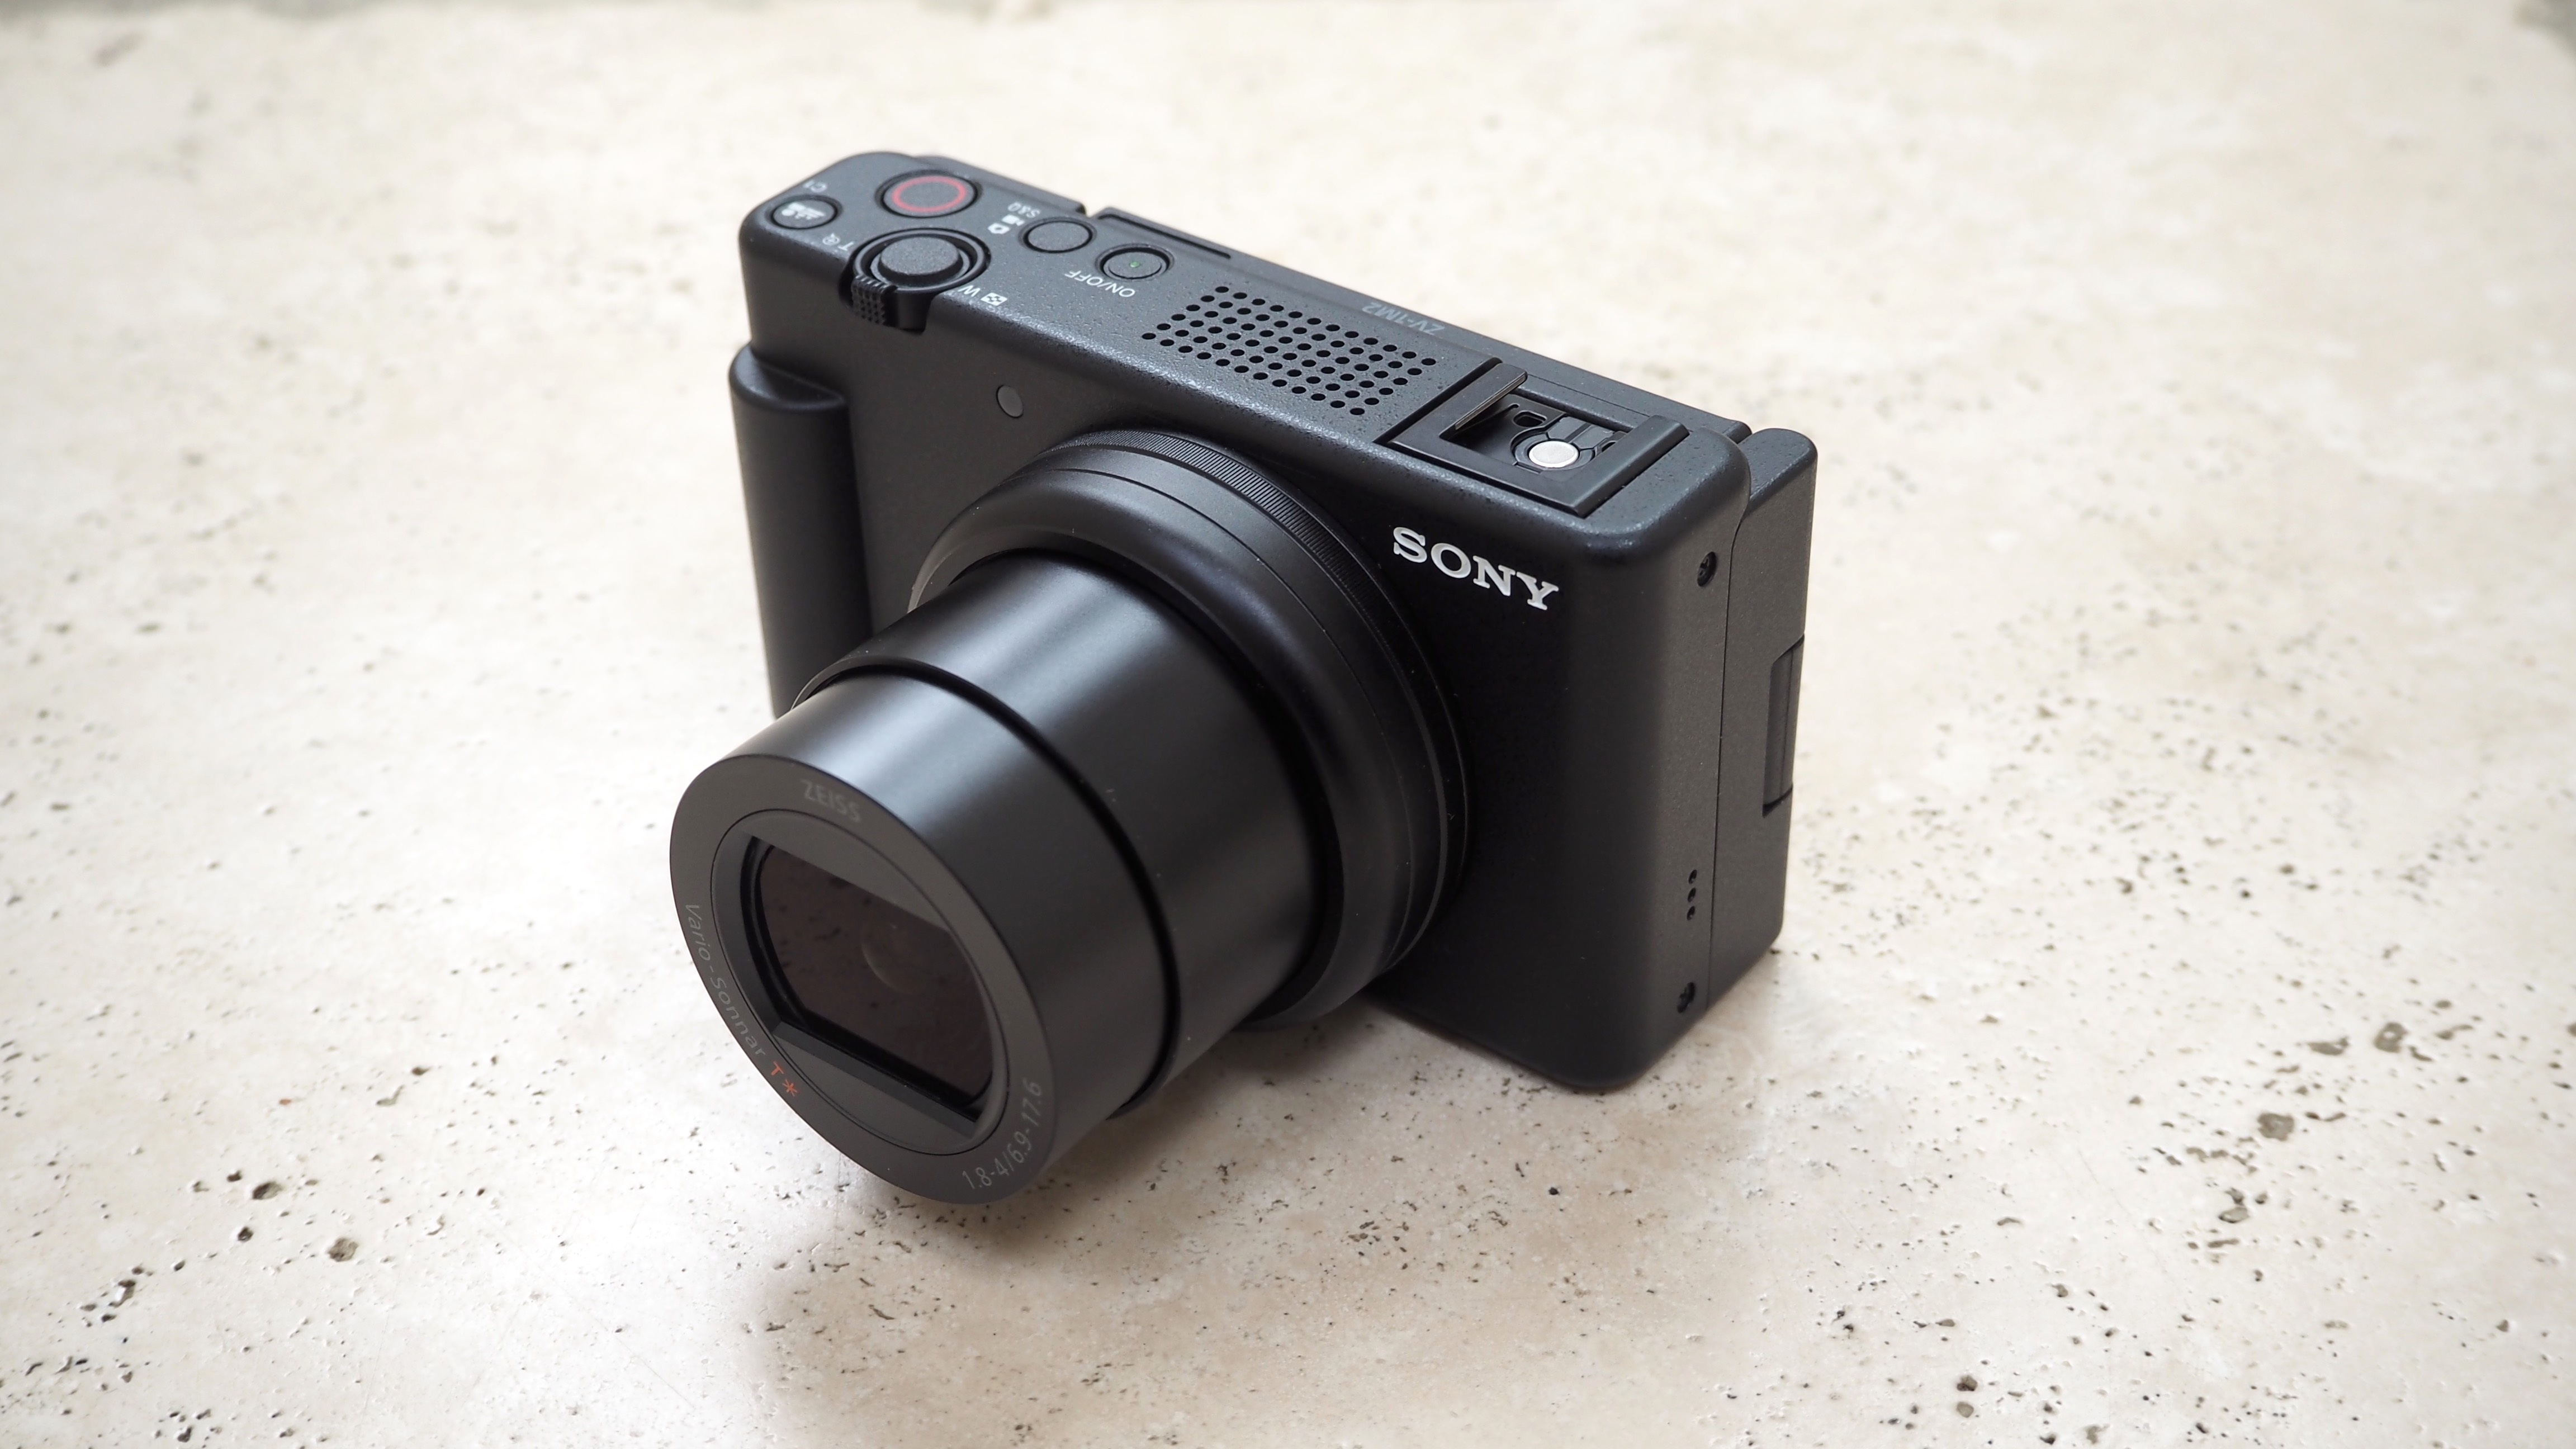 The Sony ZV-1 II has the lens vloggers wanted all along – at a price